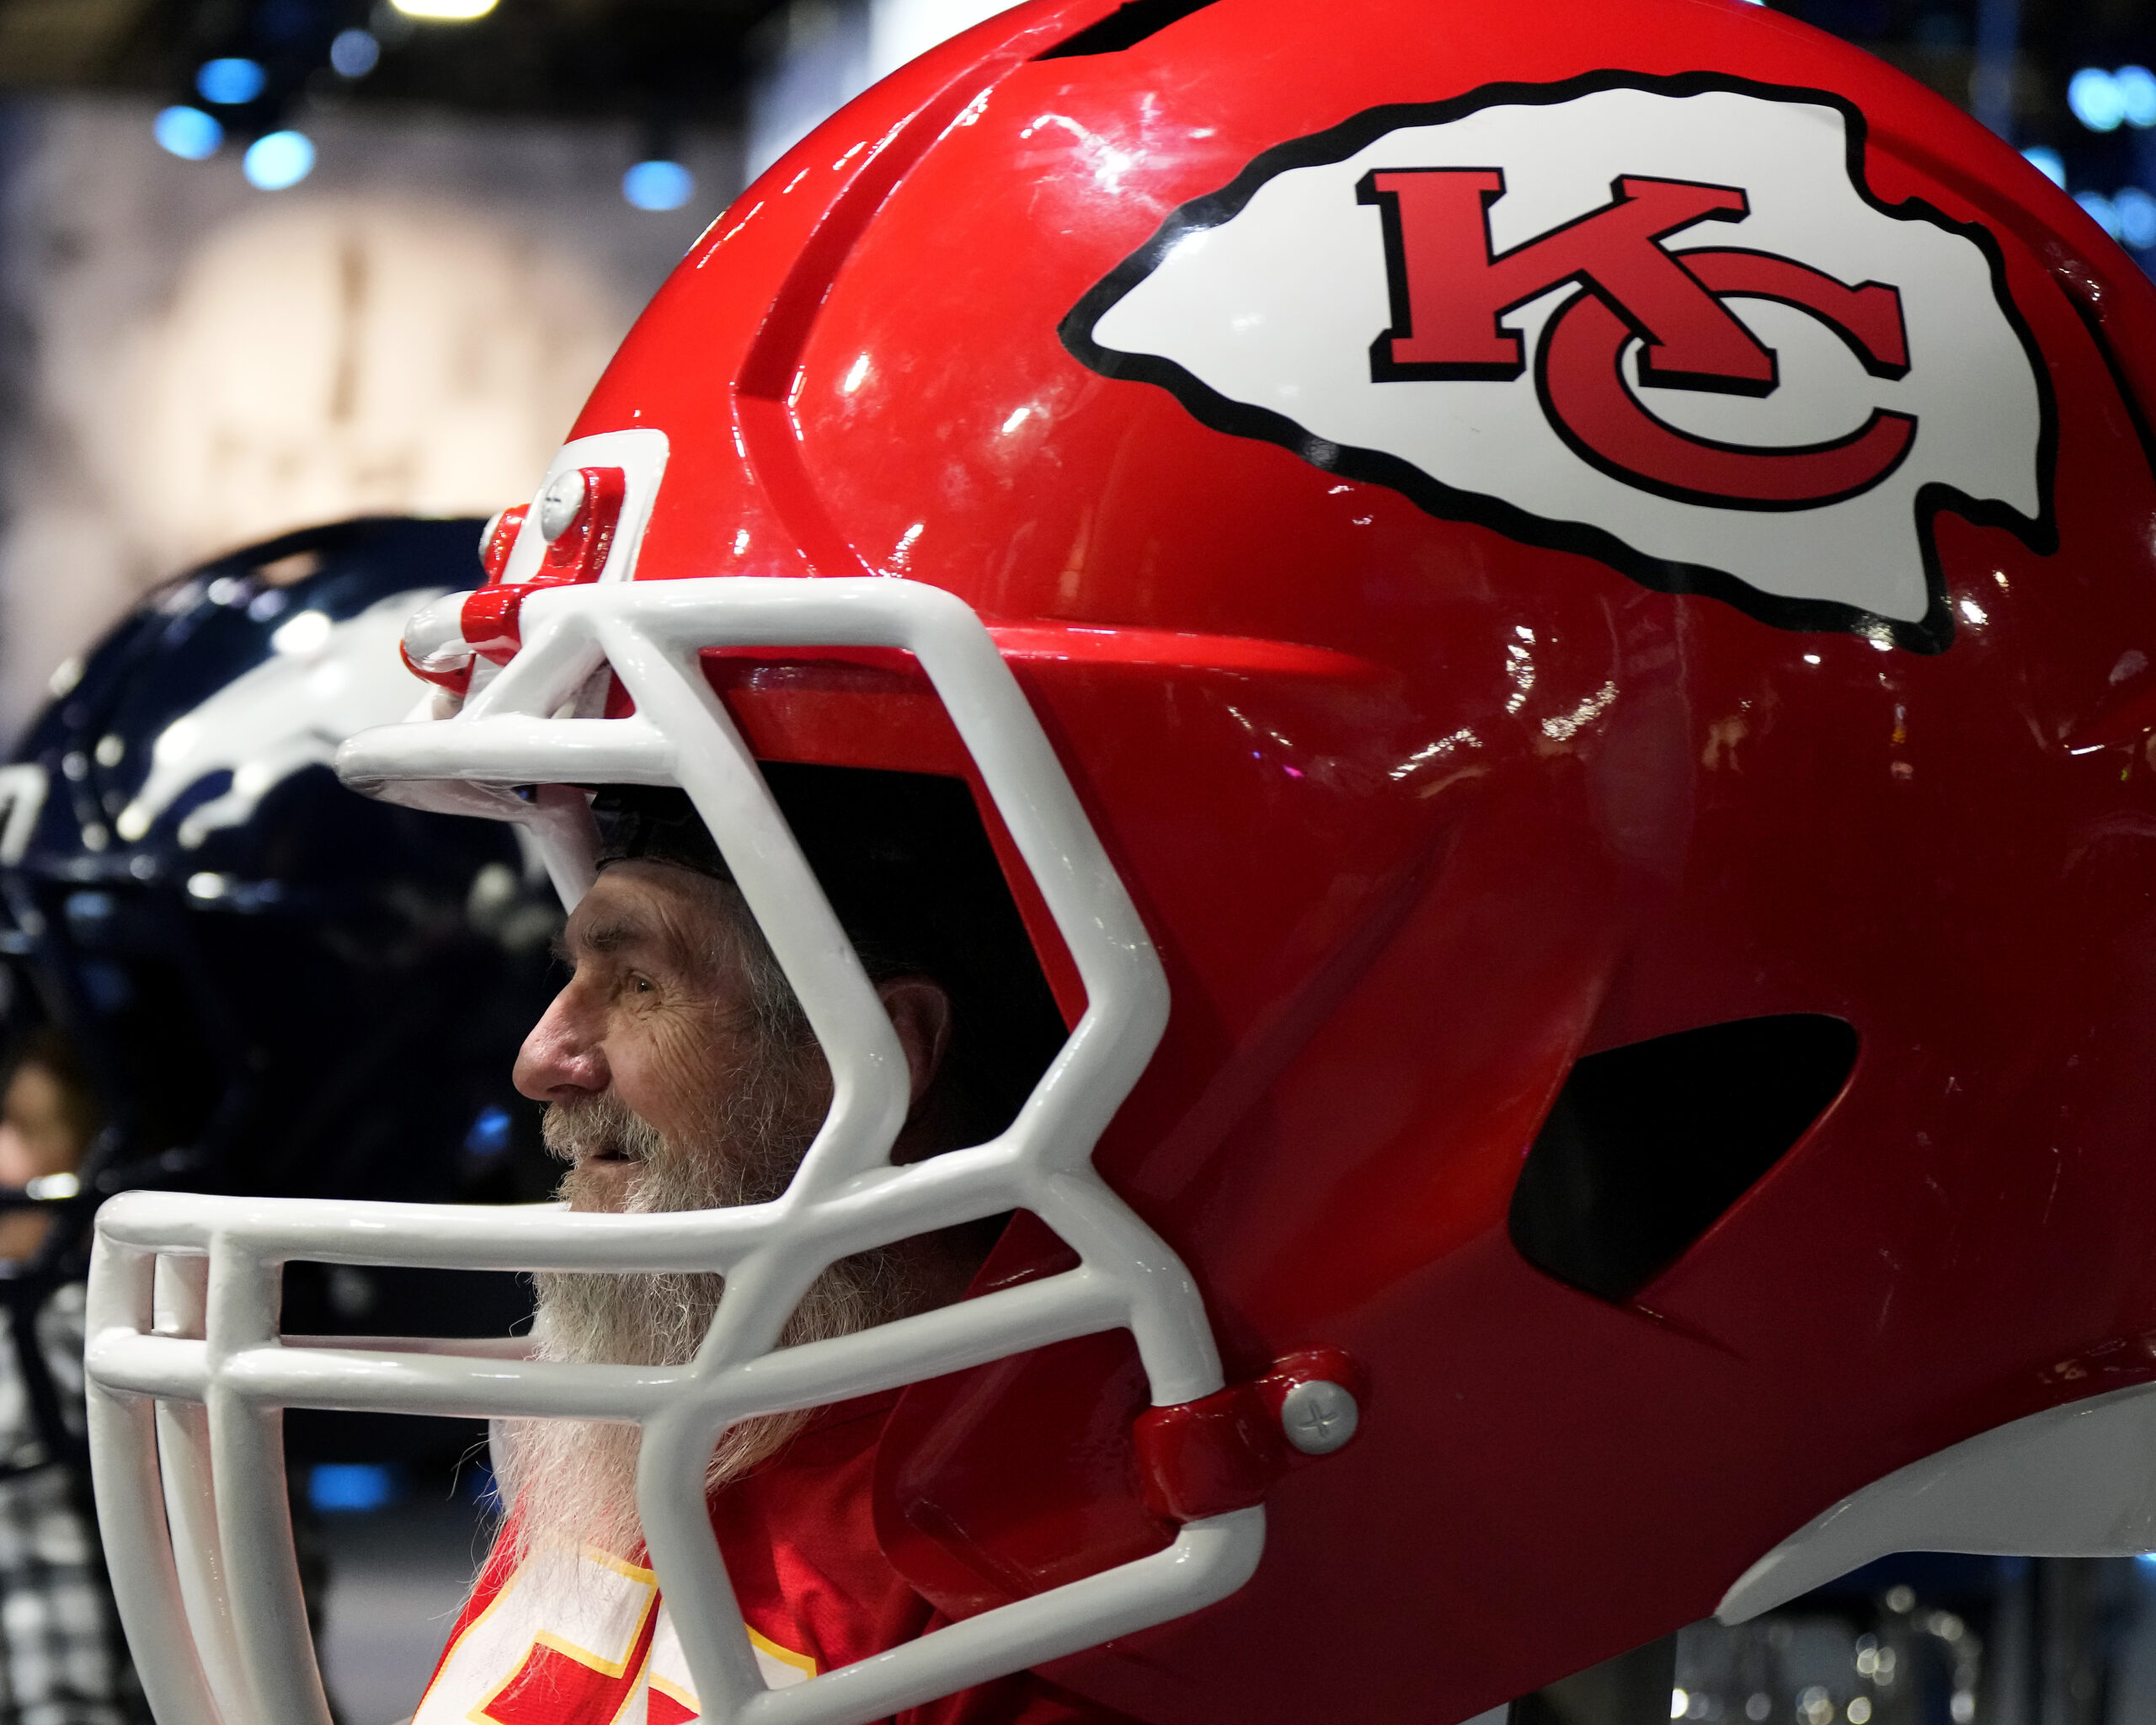 Native American advocates protest Kansas City Chiefs name ahead of